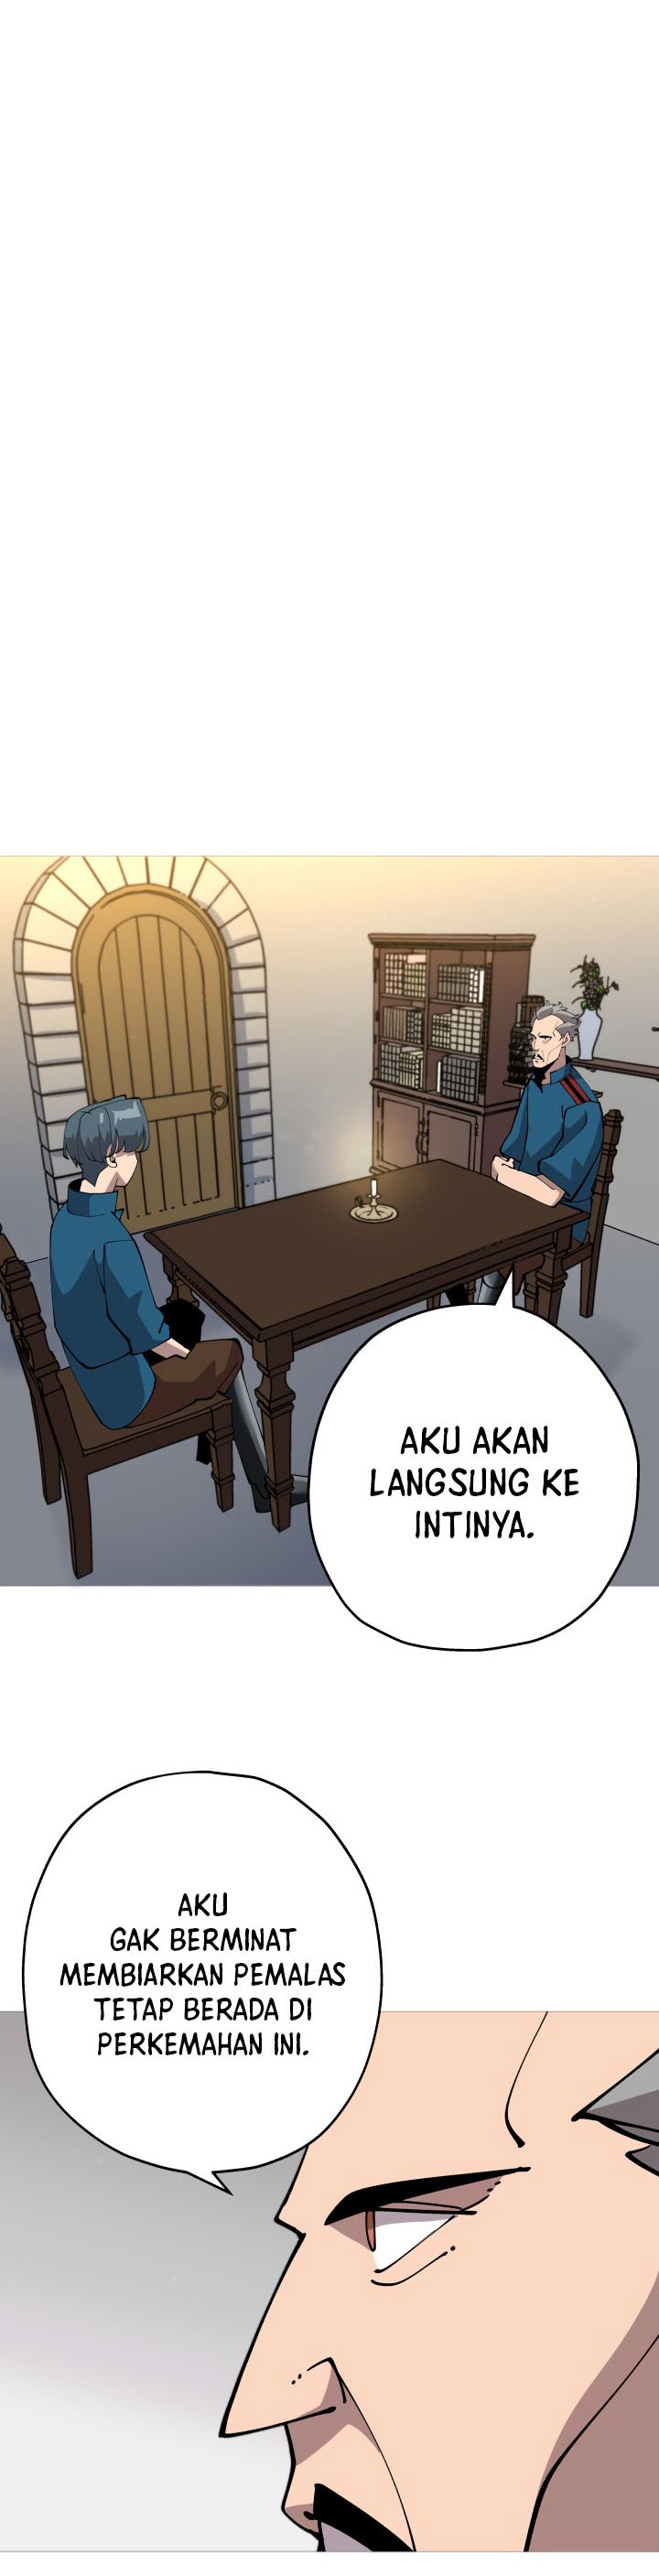 Dilarang COPAS - situs resmi www.mangacanblog.com - Komik the story of a low rank soldier becoming a monarch 022 - chapter 22 23 Indonesia the story of a low rank soldier becoming a monarch 022 - chapter 22 Terbaru 6|Baca Manga Komik Indonesia|Mangacan